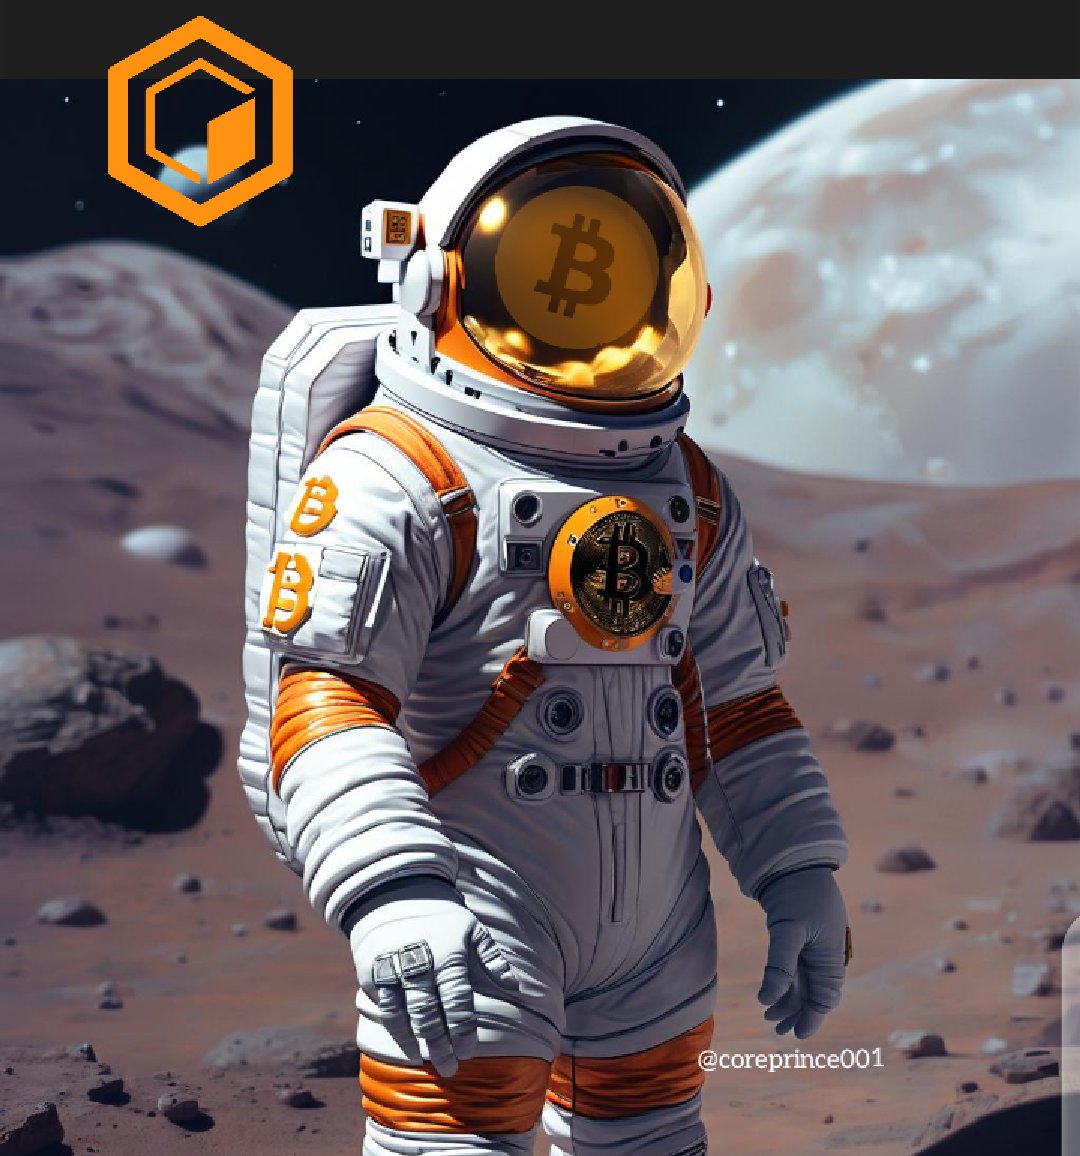 Just as man doesn't become the creatures in Space neither does he the creatures in the Sea, this simply explains #BTC and #coreBTC.
#Core unlocking Bitcoin utilities beyond just the Bitcoin Network without compromising it security and decentralization: 
unlockingbitcoindefi.com